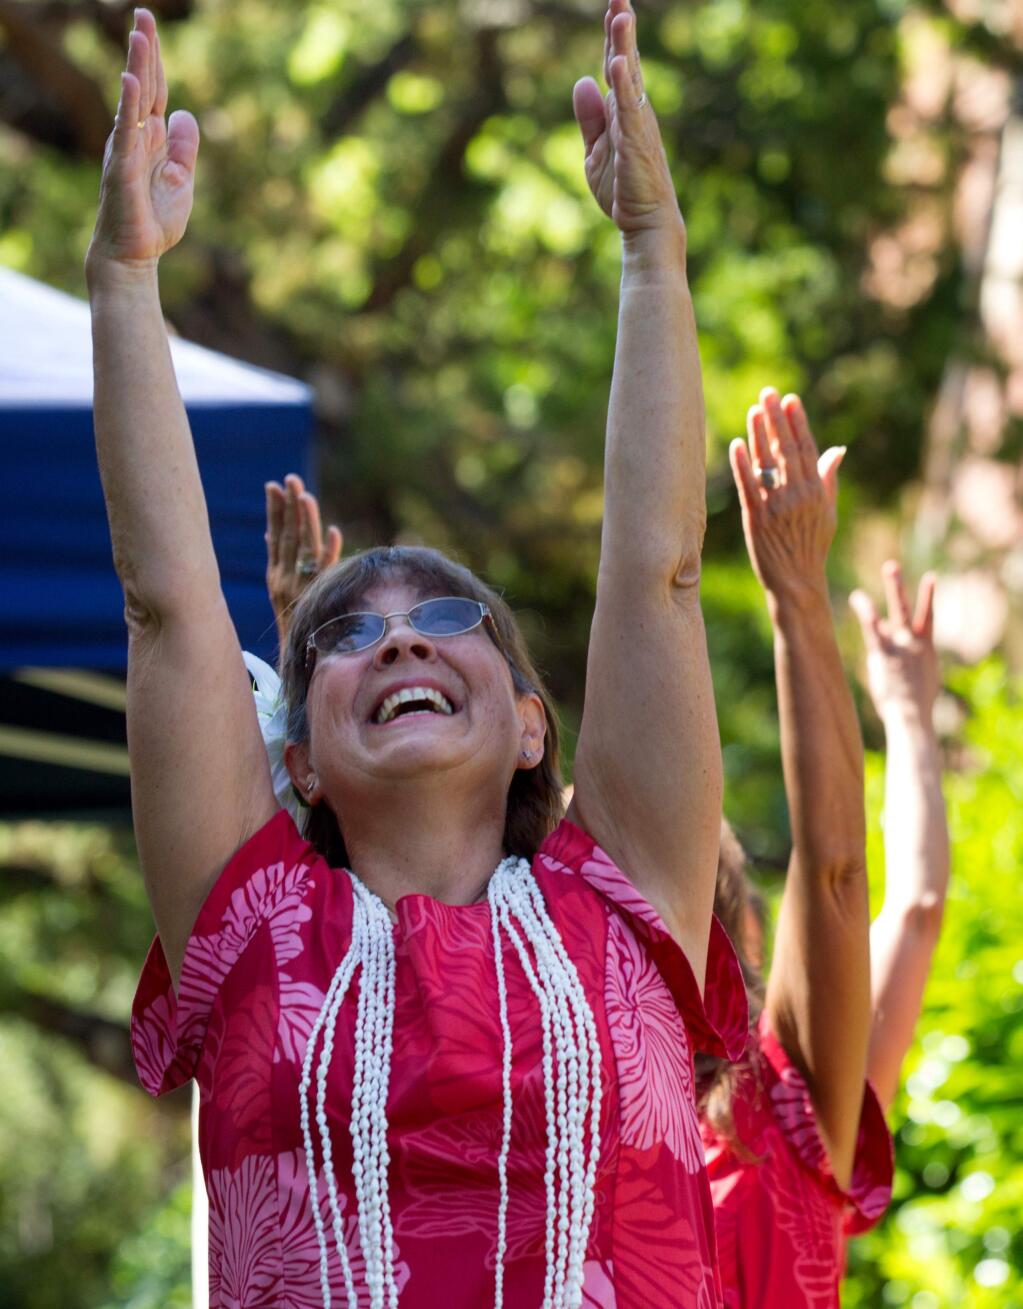 Linda Green of Sonoma dances with Hula Dancers of Sonoma, at the fourth Annual May Day Aloha Festival, held during the annual Day Under the Oaks, at Santa Rosa Junior College, in Santa Rosa Sunday, May 7, 2017. (Photo by Darryl Bush / For The Press Democrat)